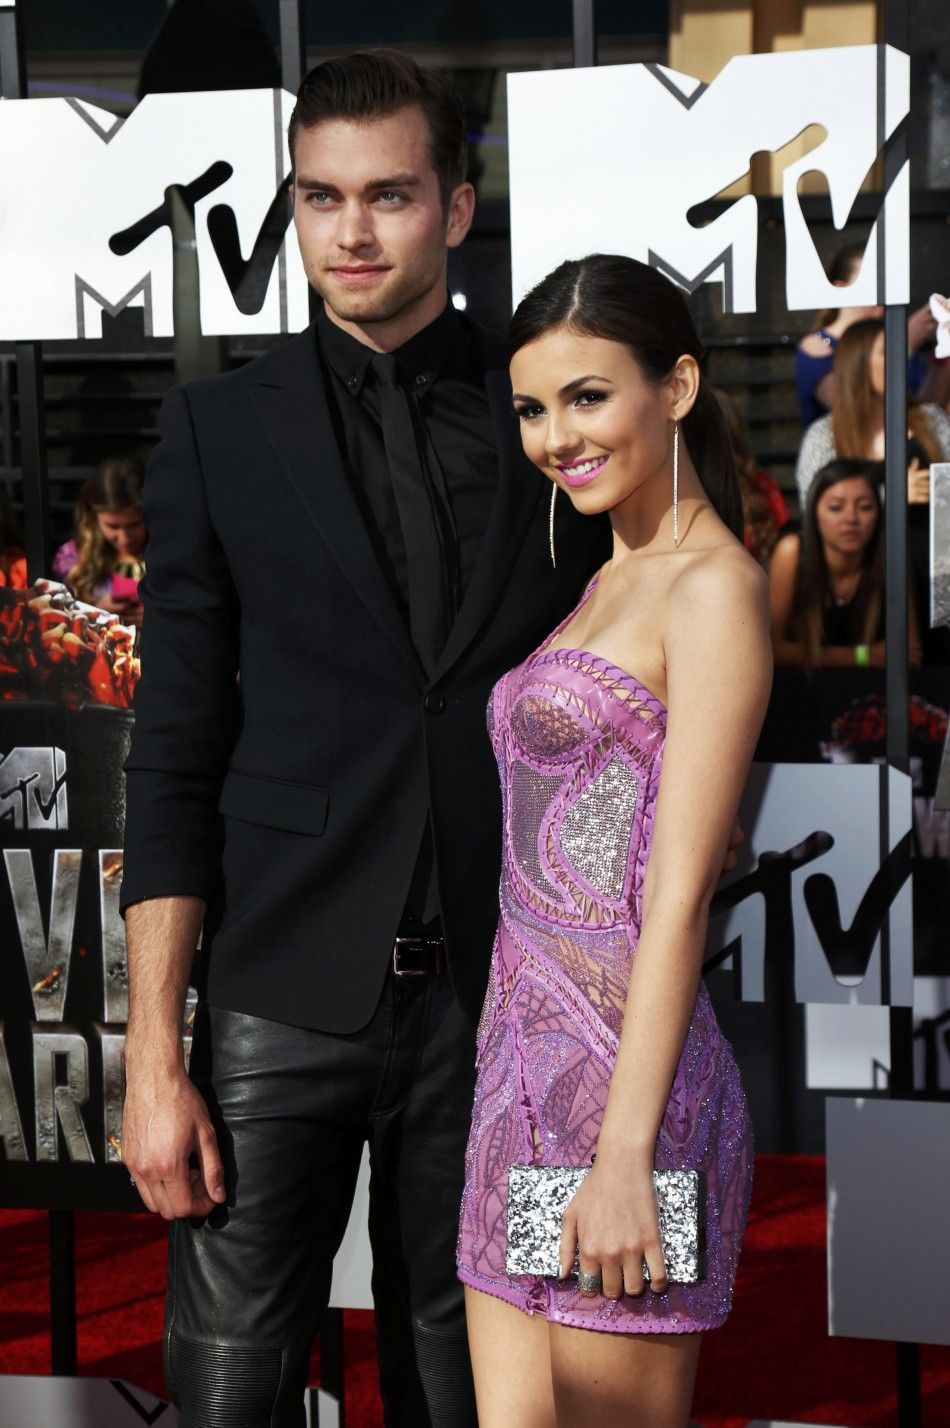 Pierson Fode and Victoria Justice arrive at the 2014 MTV Movie Awards in Los Angeles, California  April 13, 2014.  REUTERSDanny Moloshok 